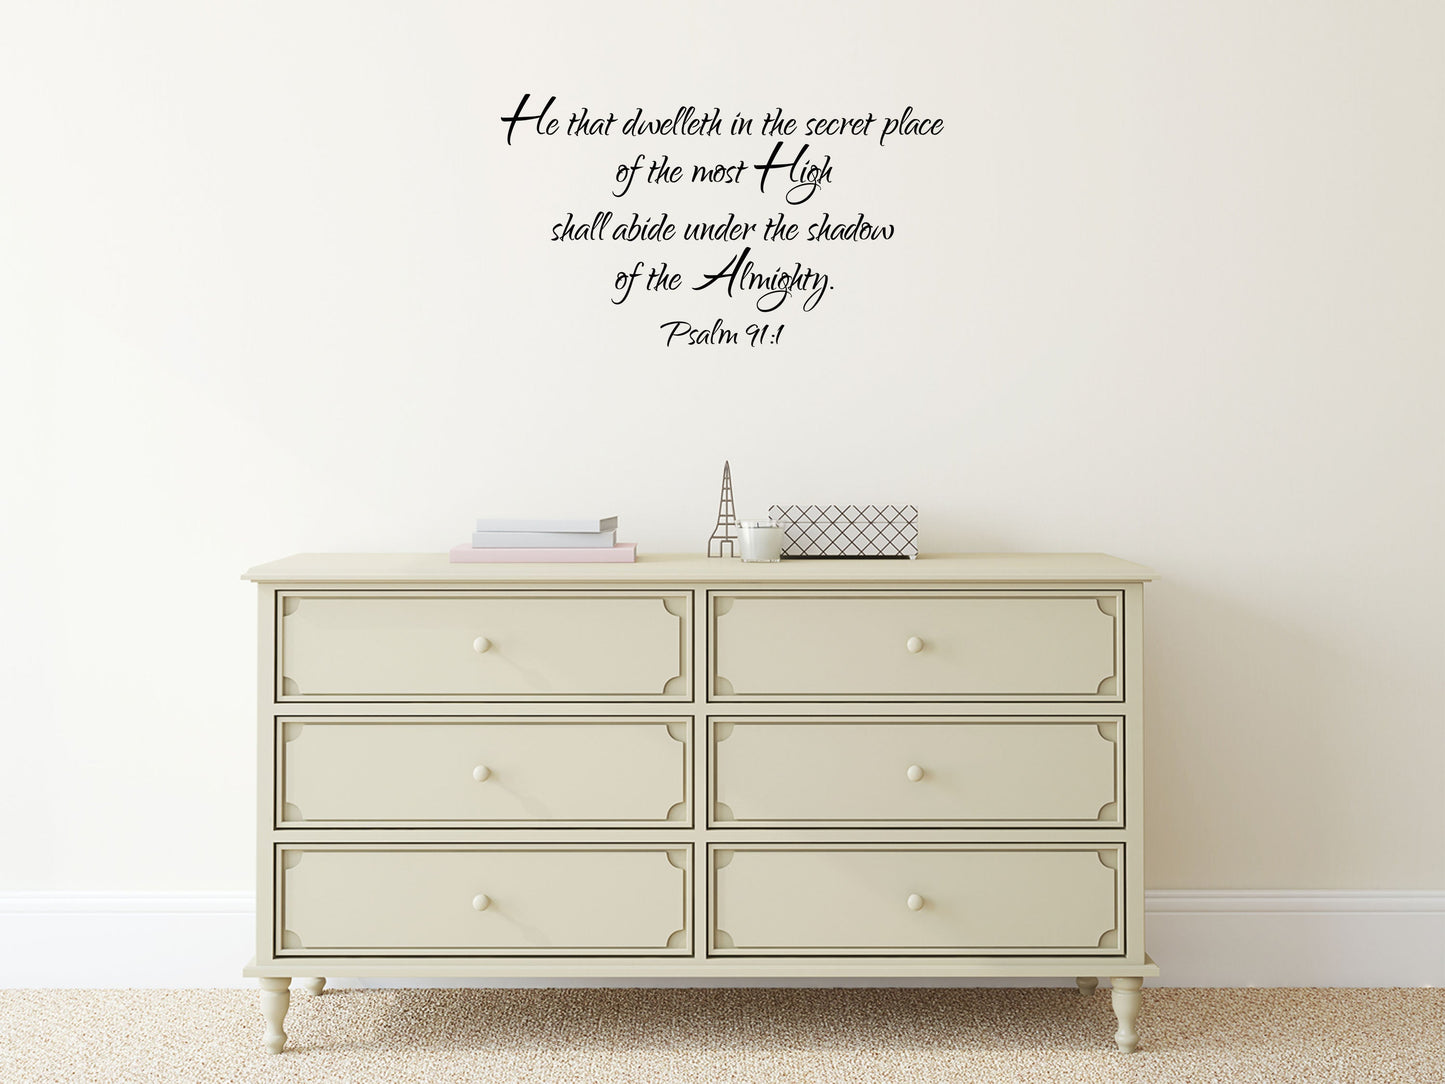 Psalm 91:1 - Scripture Wall Decals Vinyl Wall Decal Inspirational Wall Signs 